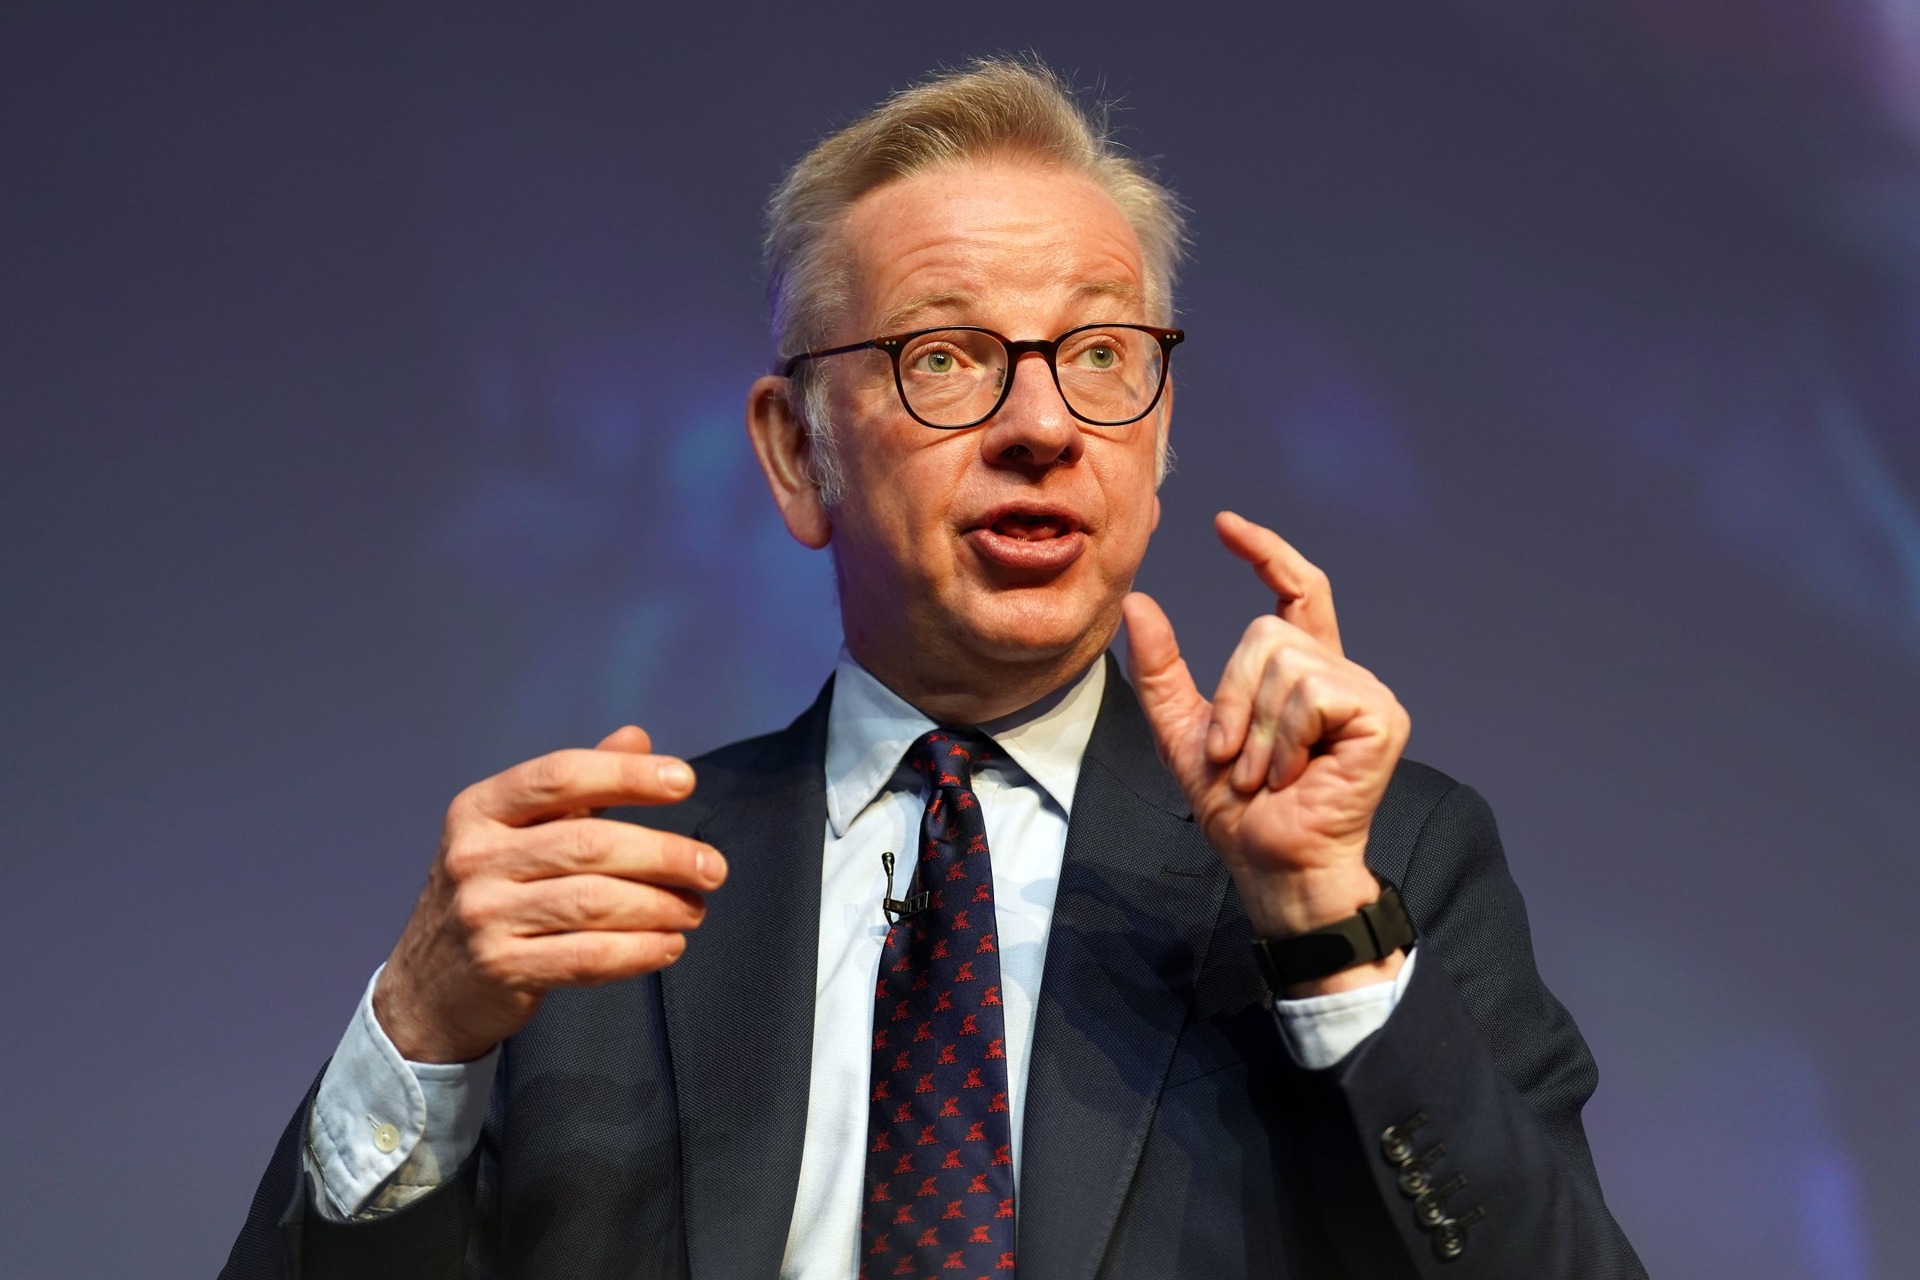 Michael Gove has said the UK Government is ‘processing’ the information, according to Lorna Slater.
